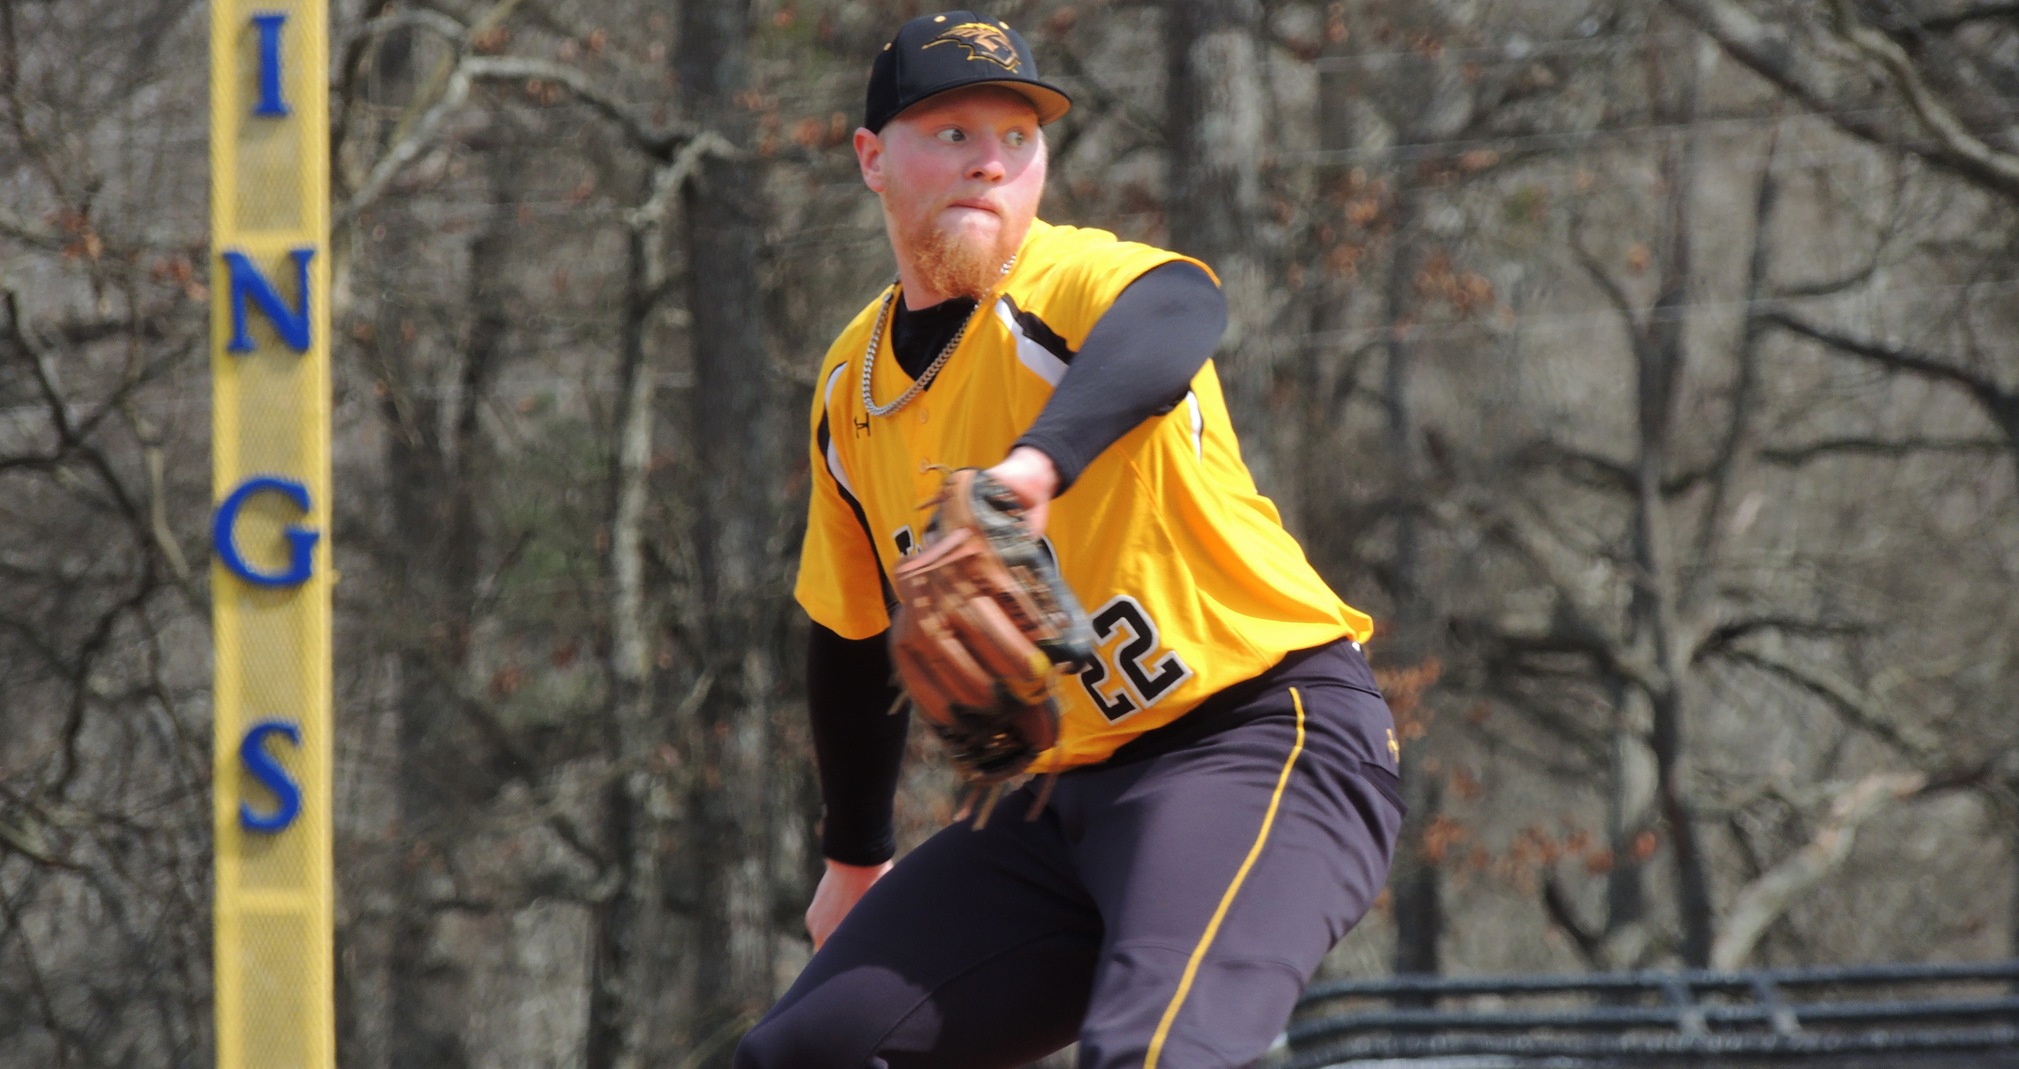 Ethan Weinandy allowed just five hits in pitching a complete-game shutout against nationally ranked Denison University.